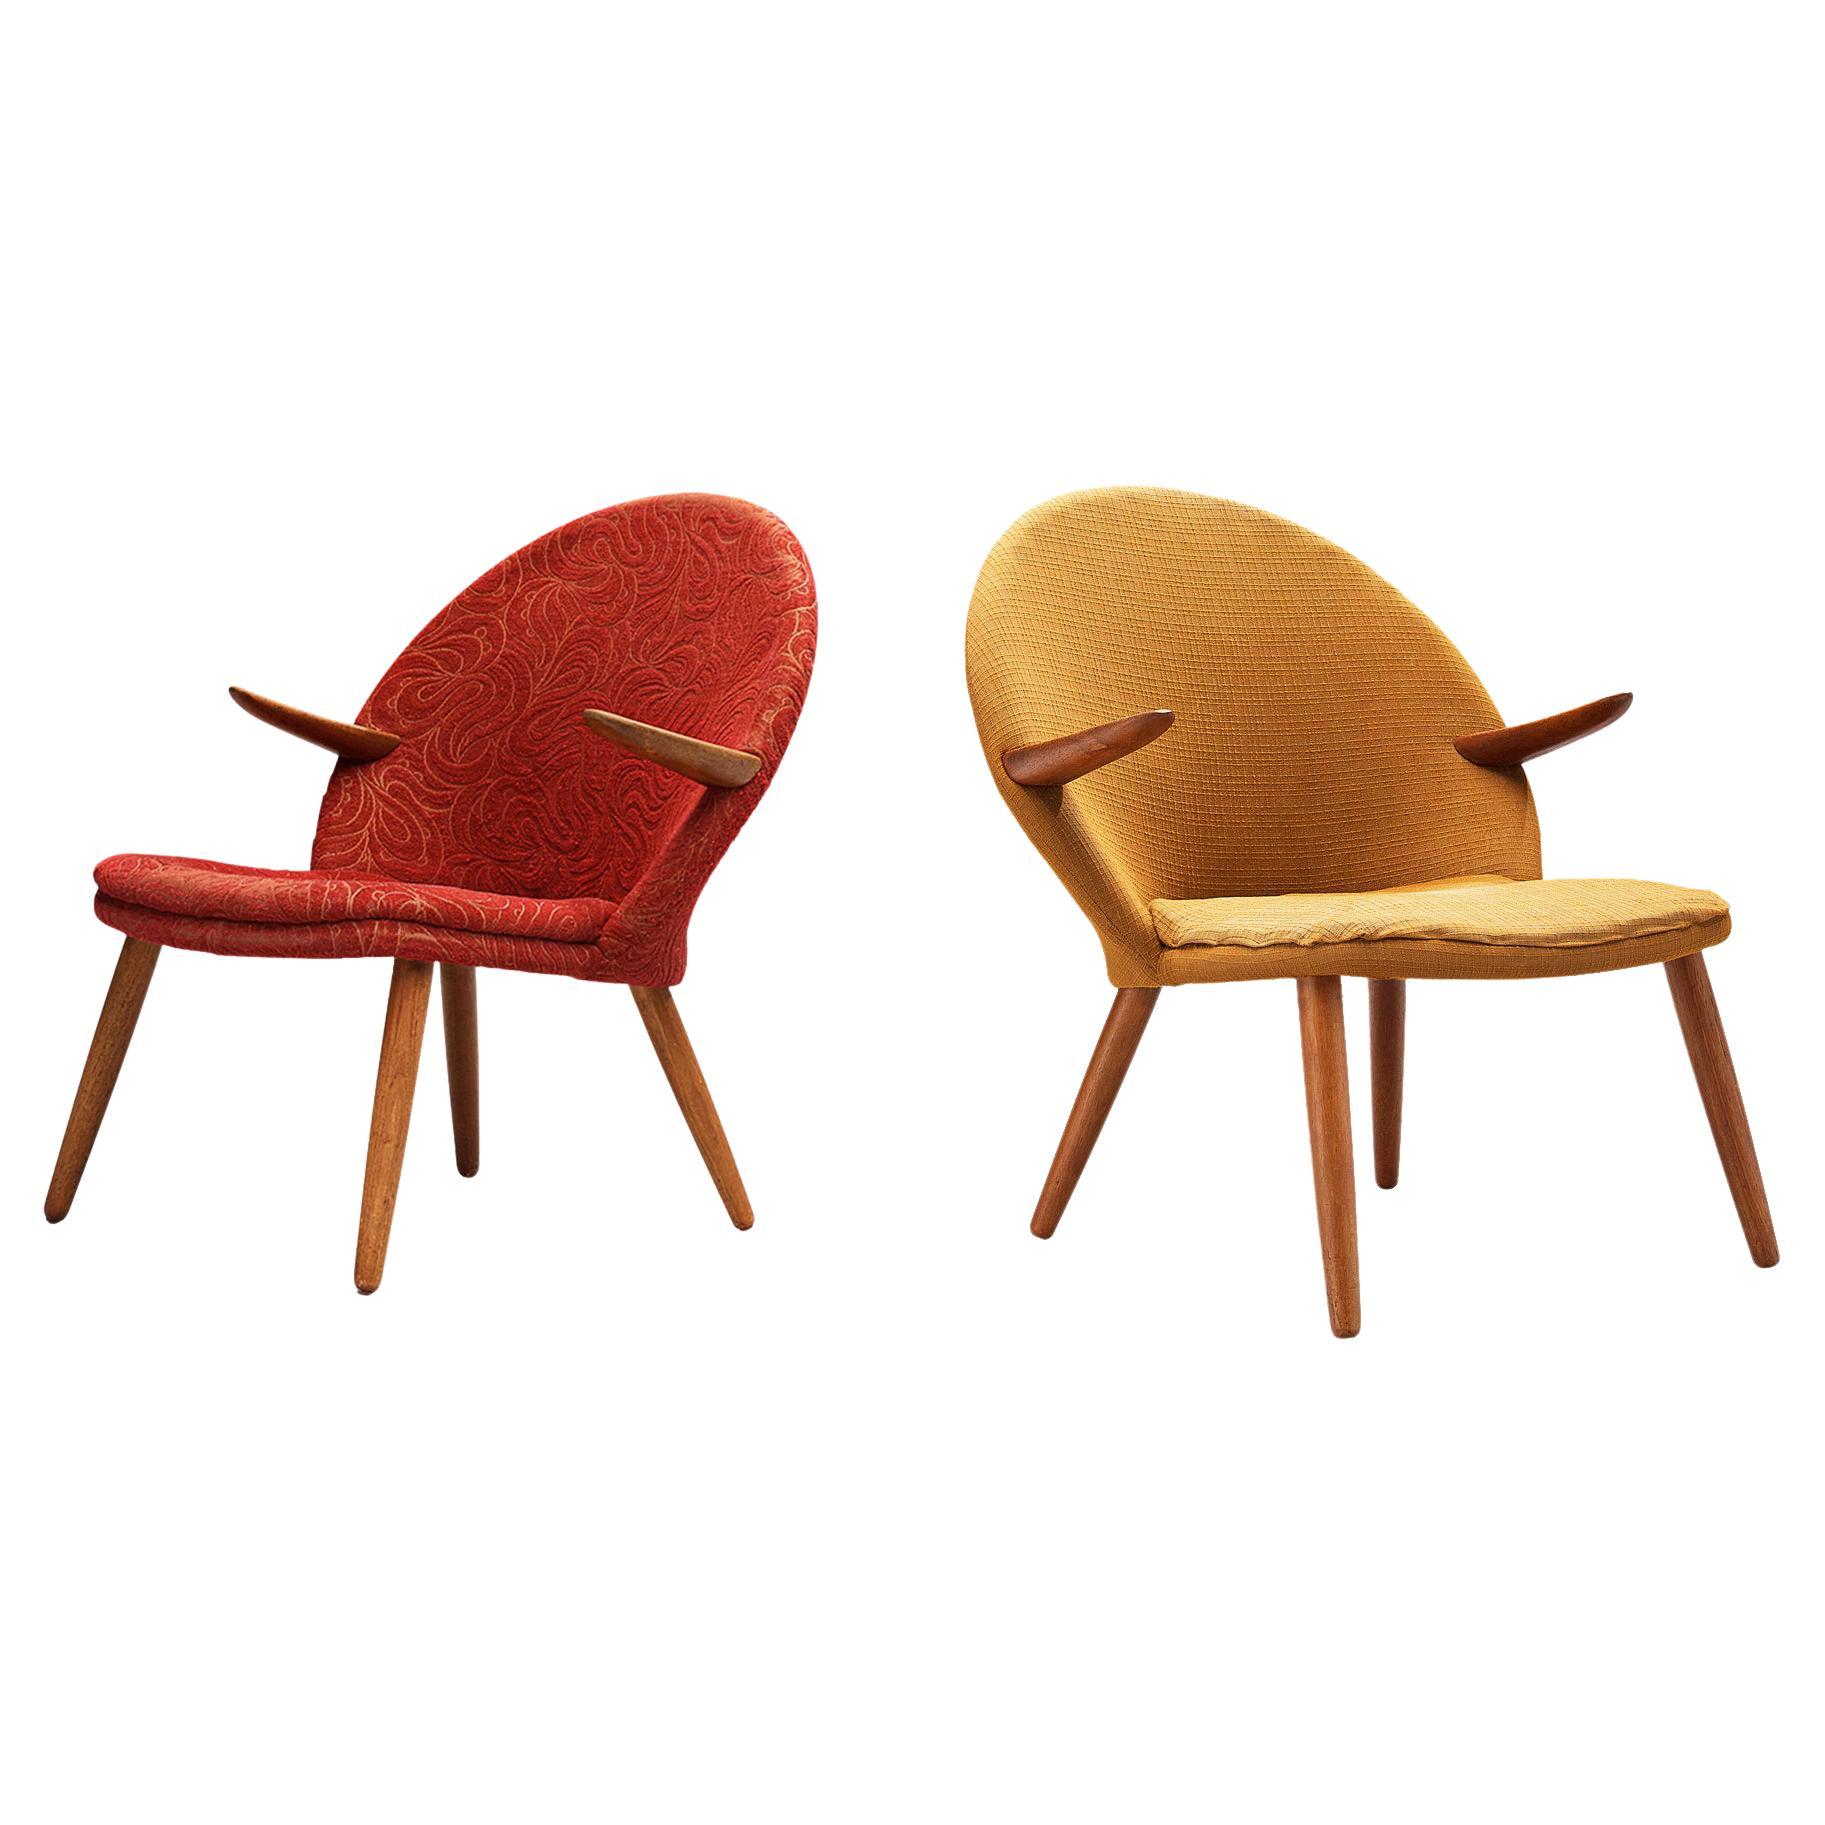 Svend Aage Eriksen, easy chairs model ‘penguin’, teak, fabric, Denmark, circa. 1960

Stunning Danish lounge chairs designed by Svend Aage Eriksen. The chair has a sculptural quality and light feeling. This is especially created by the floating